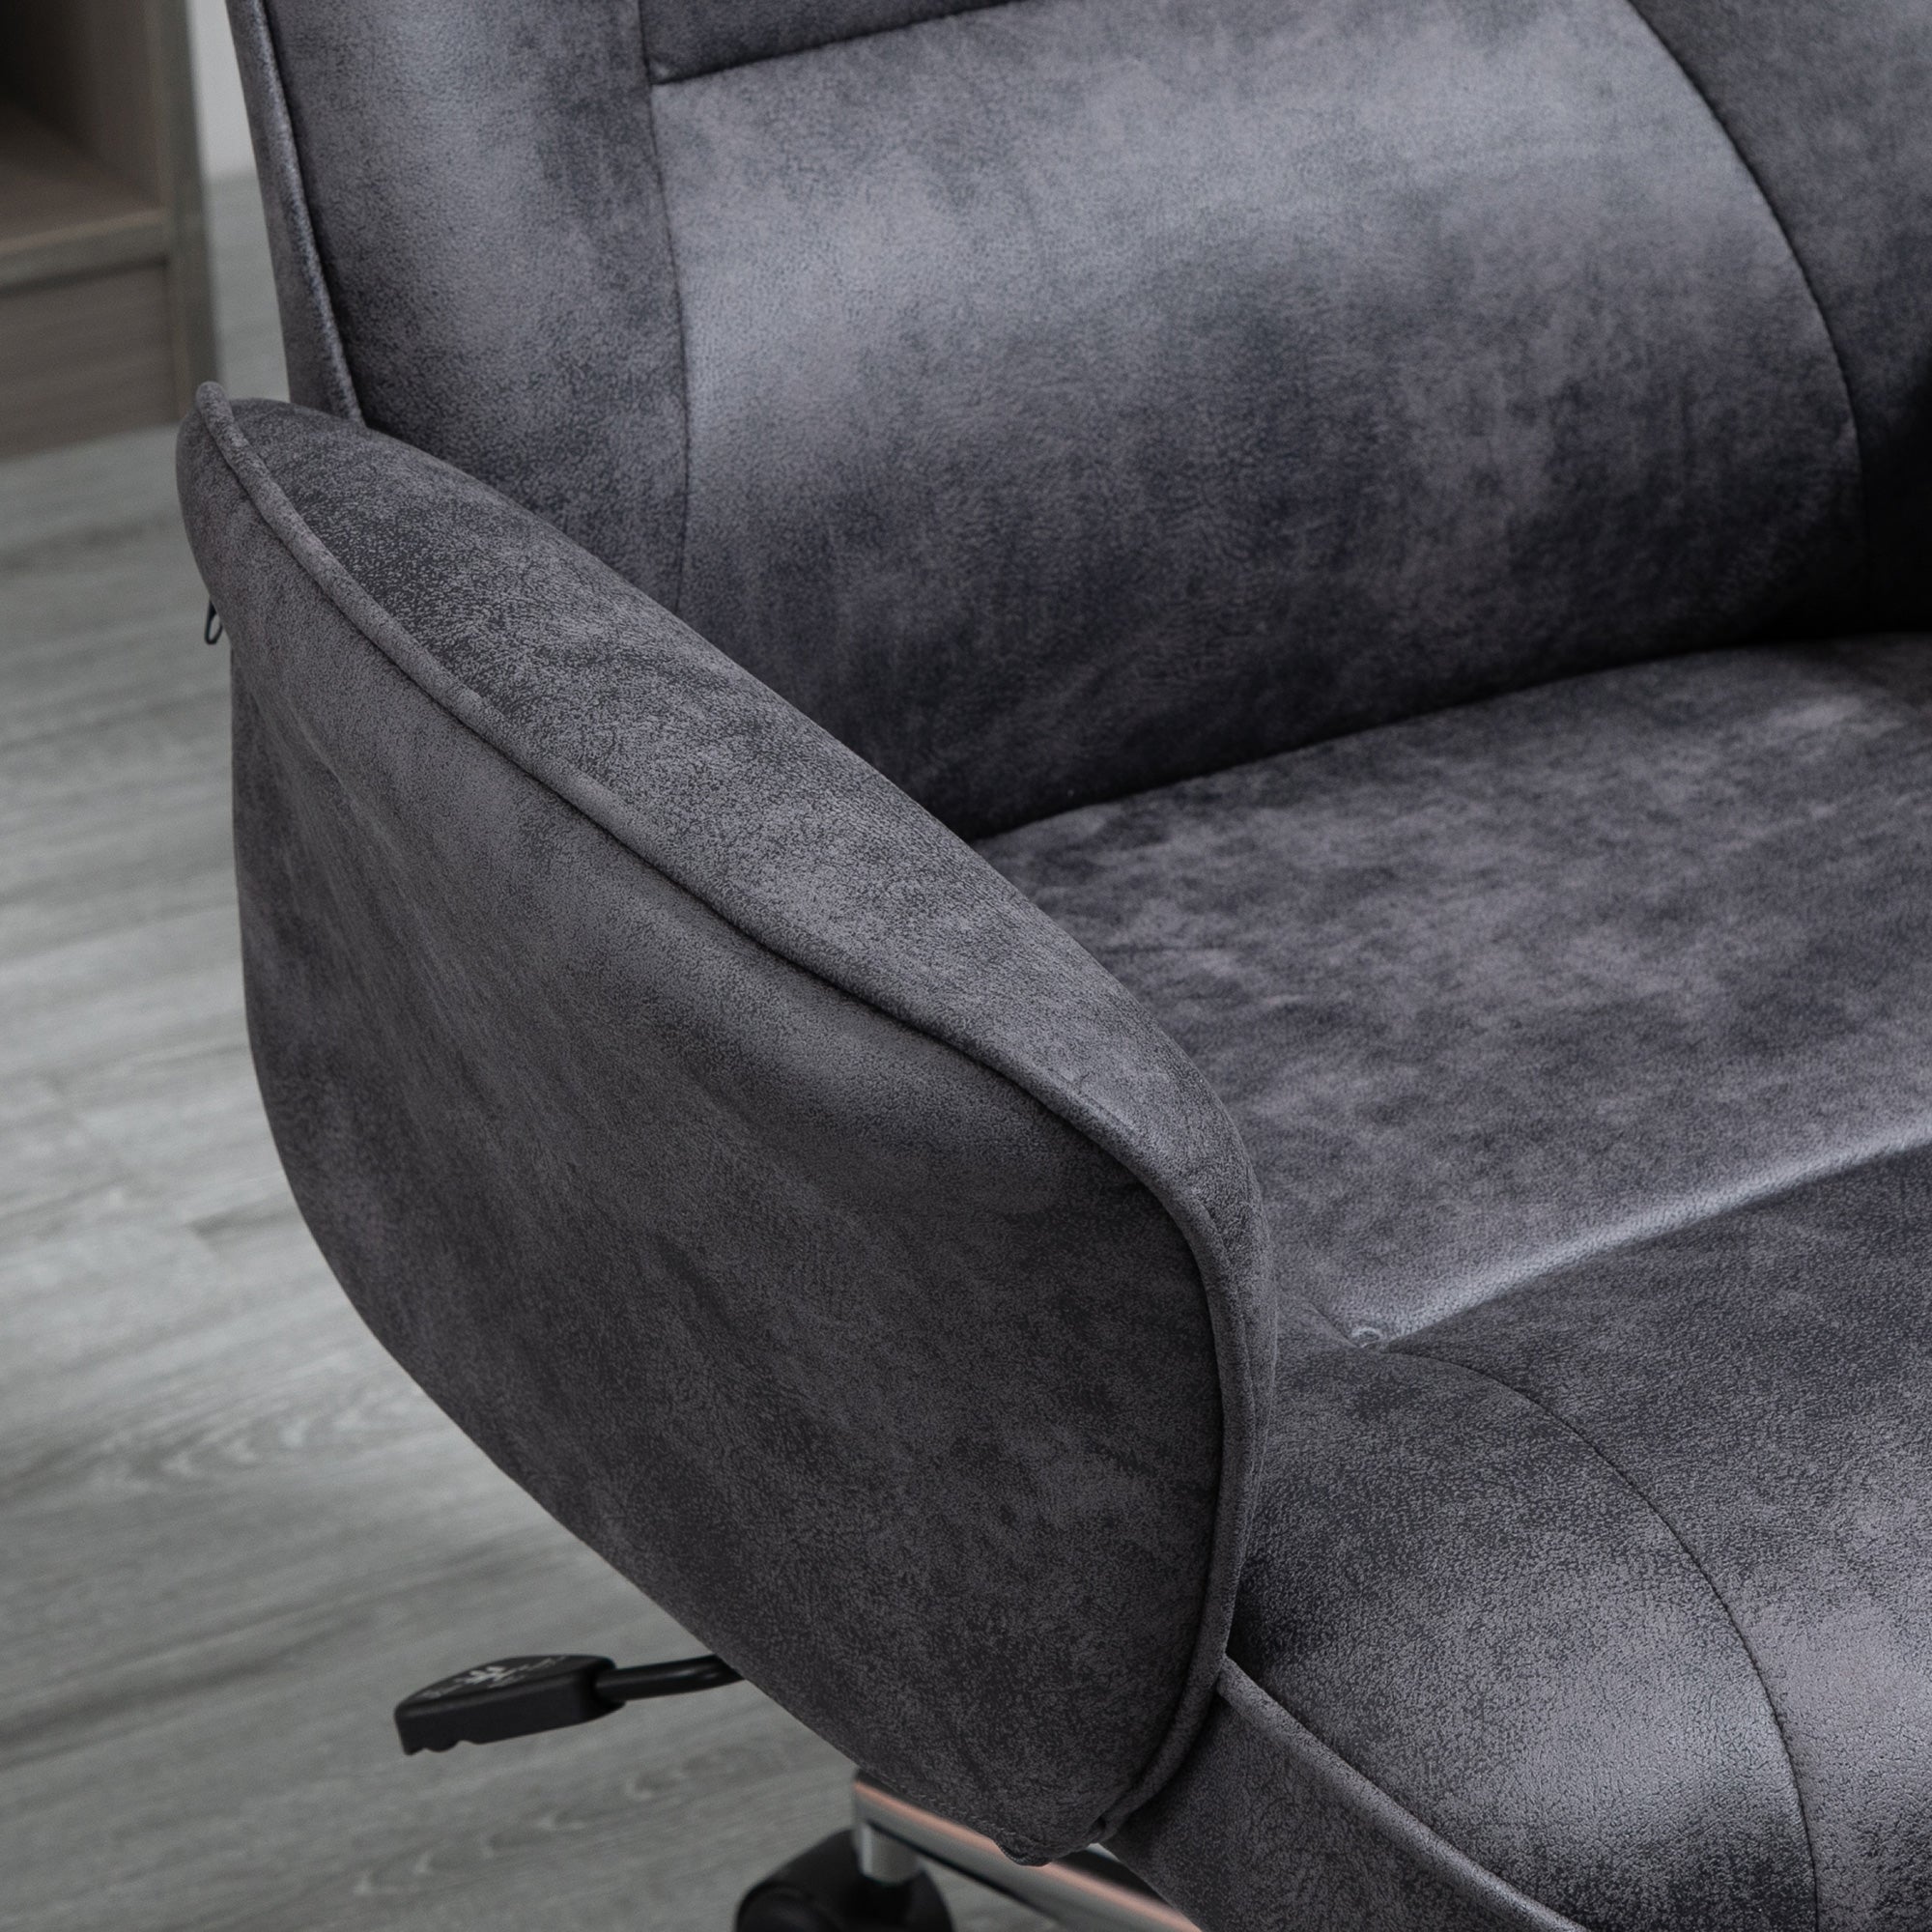 Vinsetto Swivel Computer Office Chair Mid Back Desk Chair for Home Study Bedroom, Charcoal Grey - TovaHaus